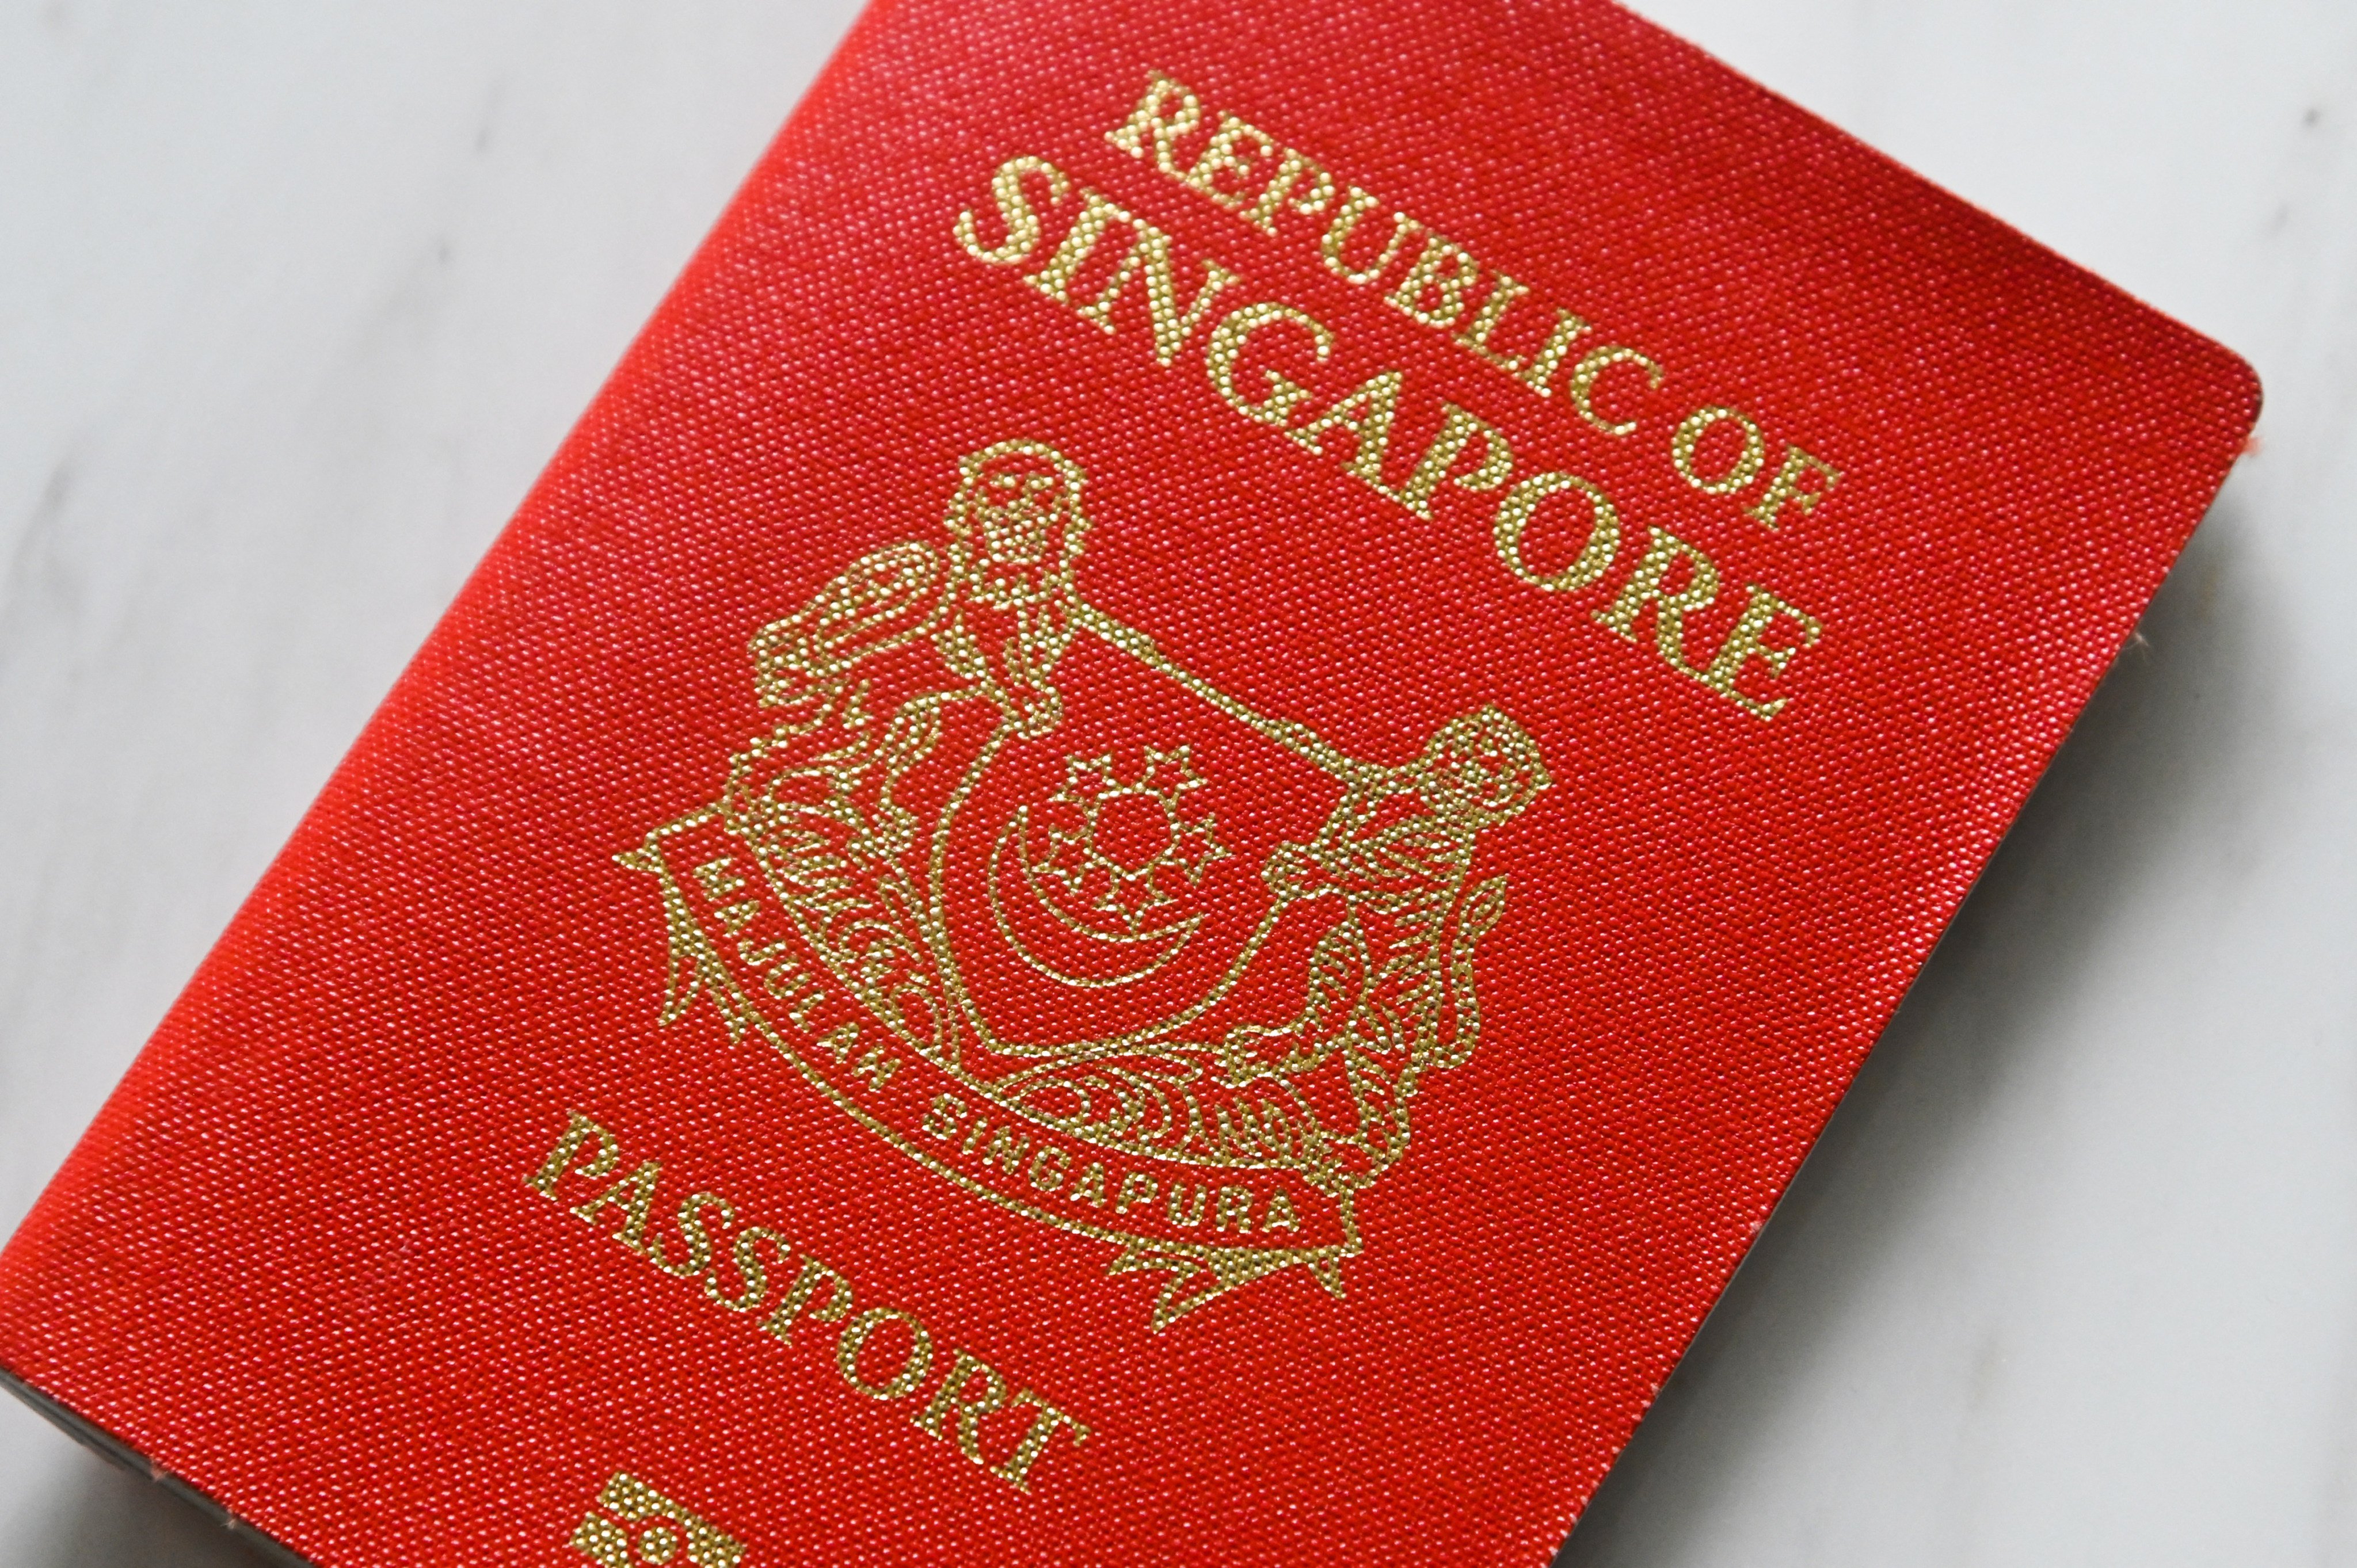 Singapore has the world’s most powerful passport. Photo: AFP